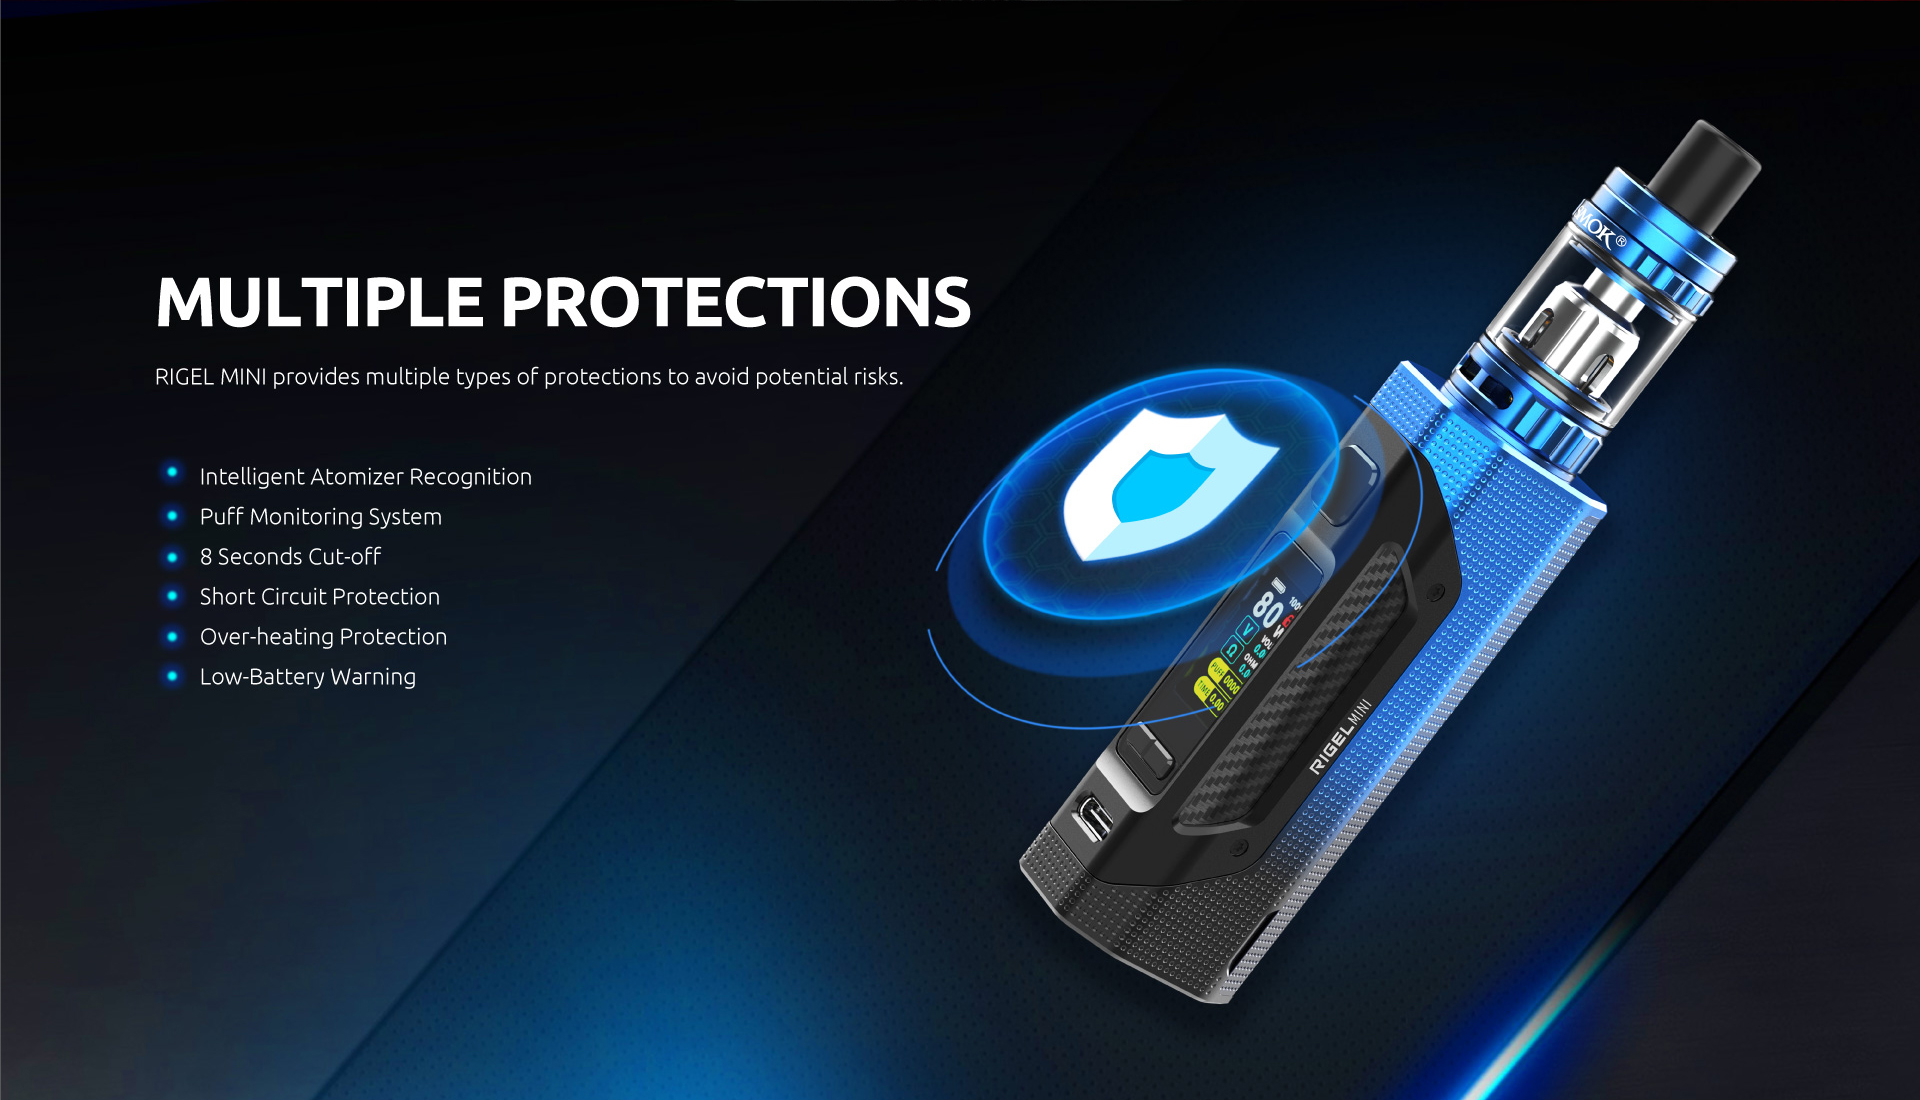 VAPE MULTIPLE PROTECTIONS